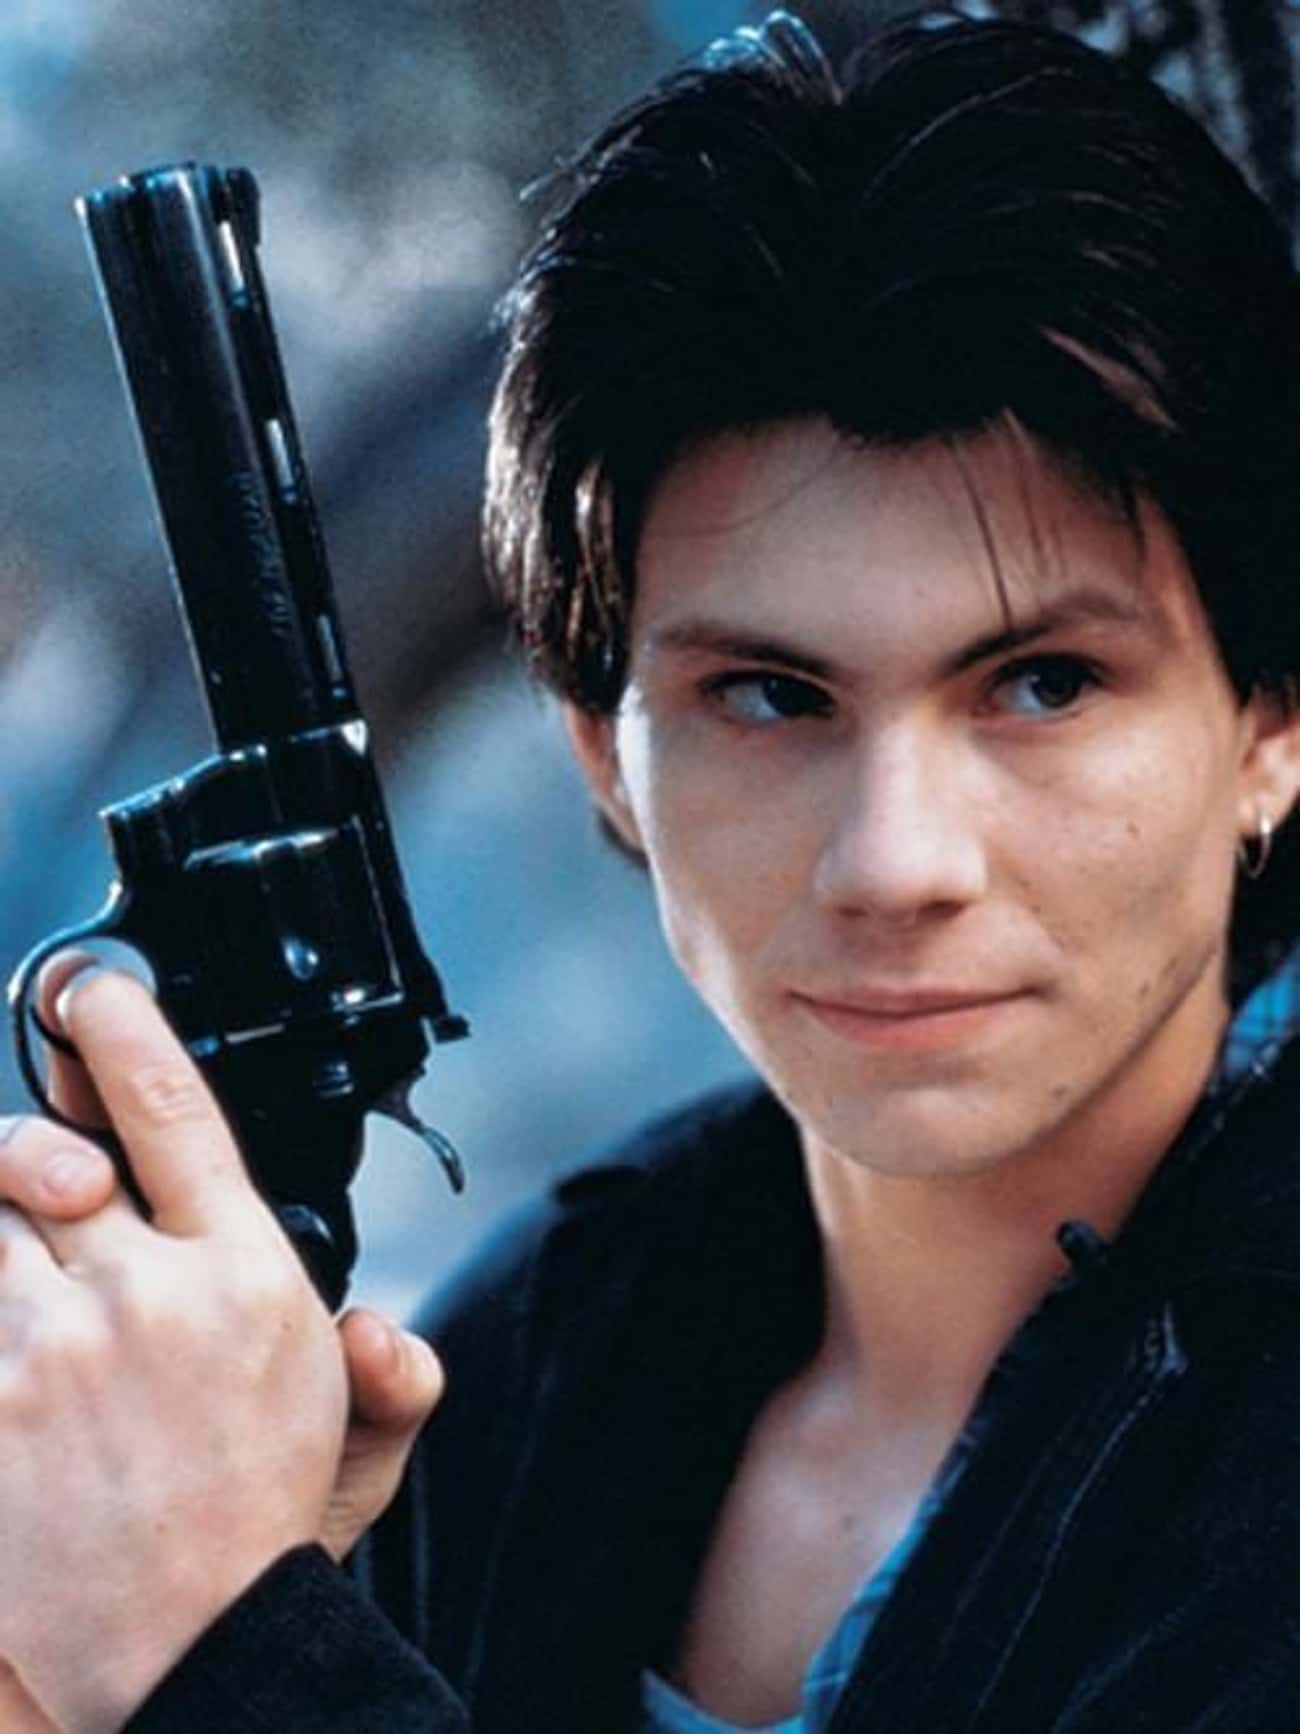 Young Christian Slater in Black Jacket Holding Gun